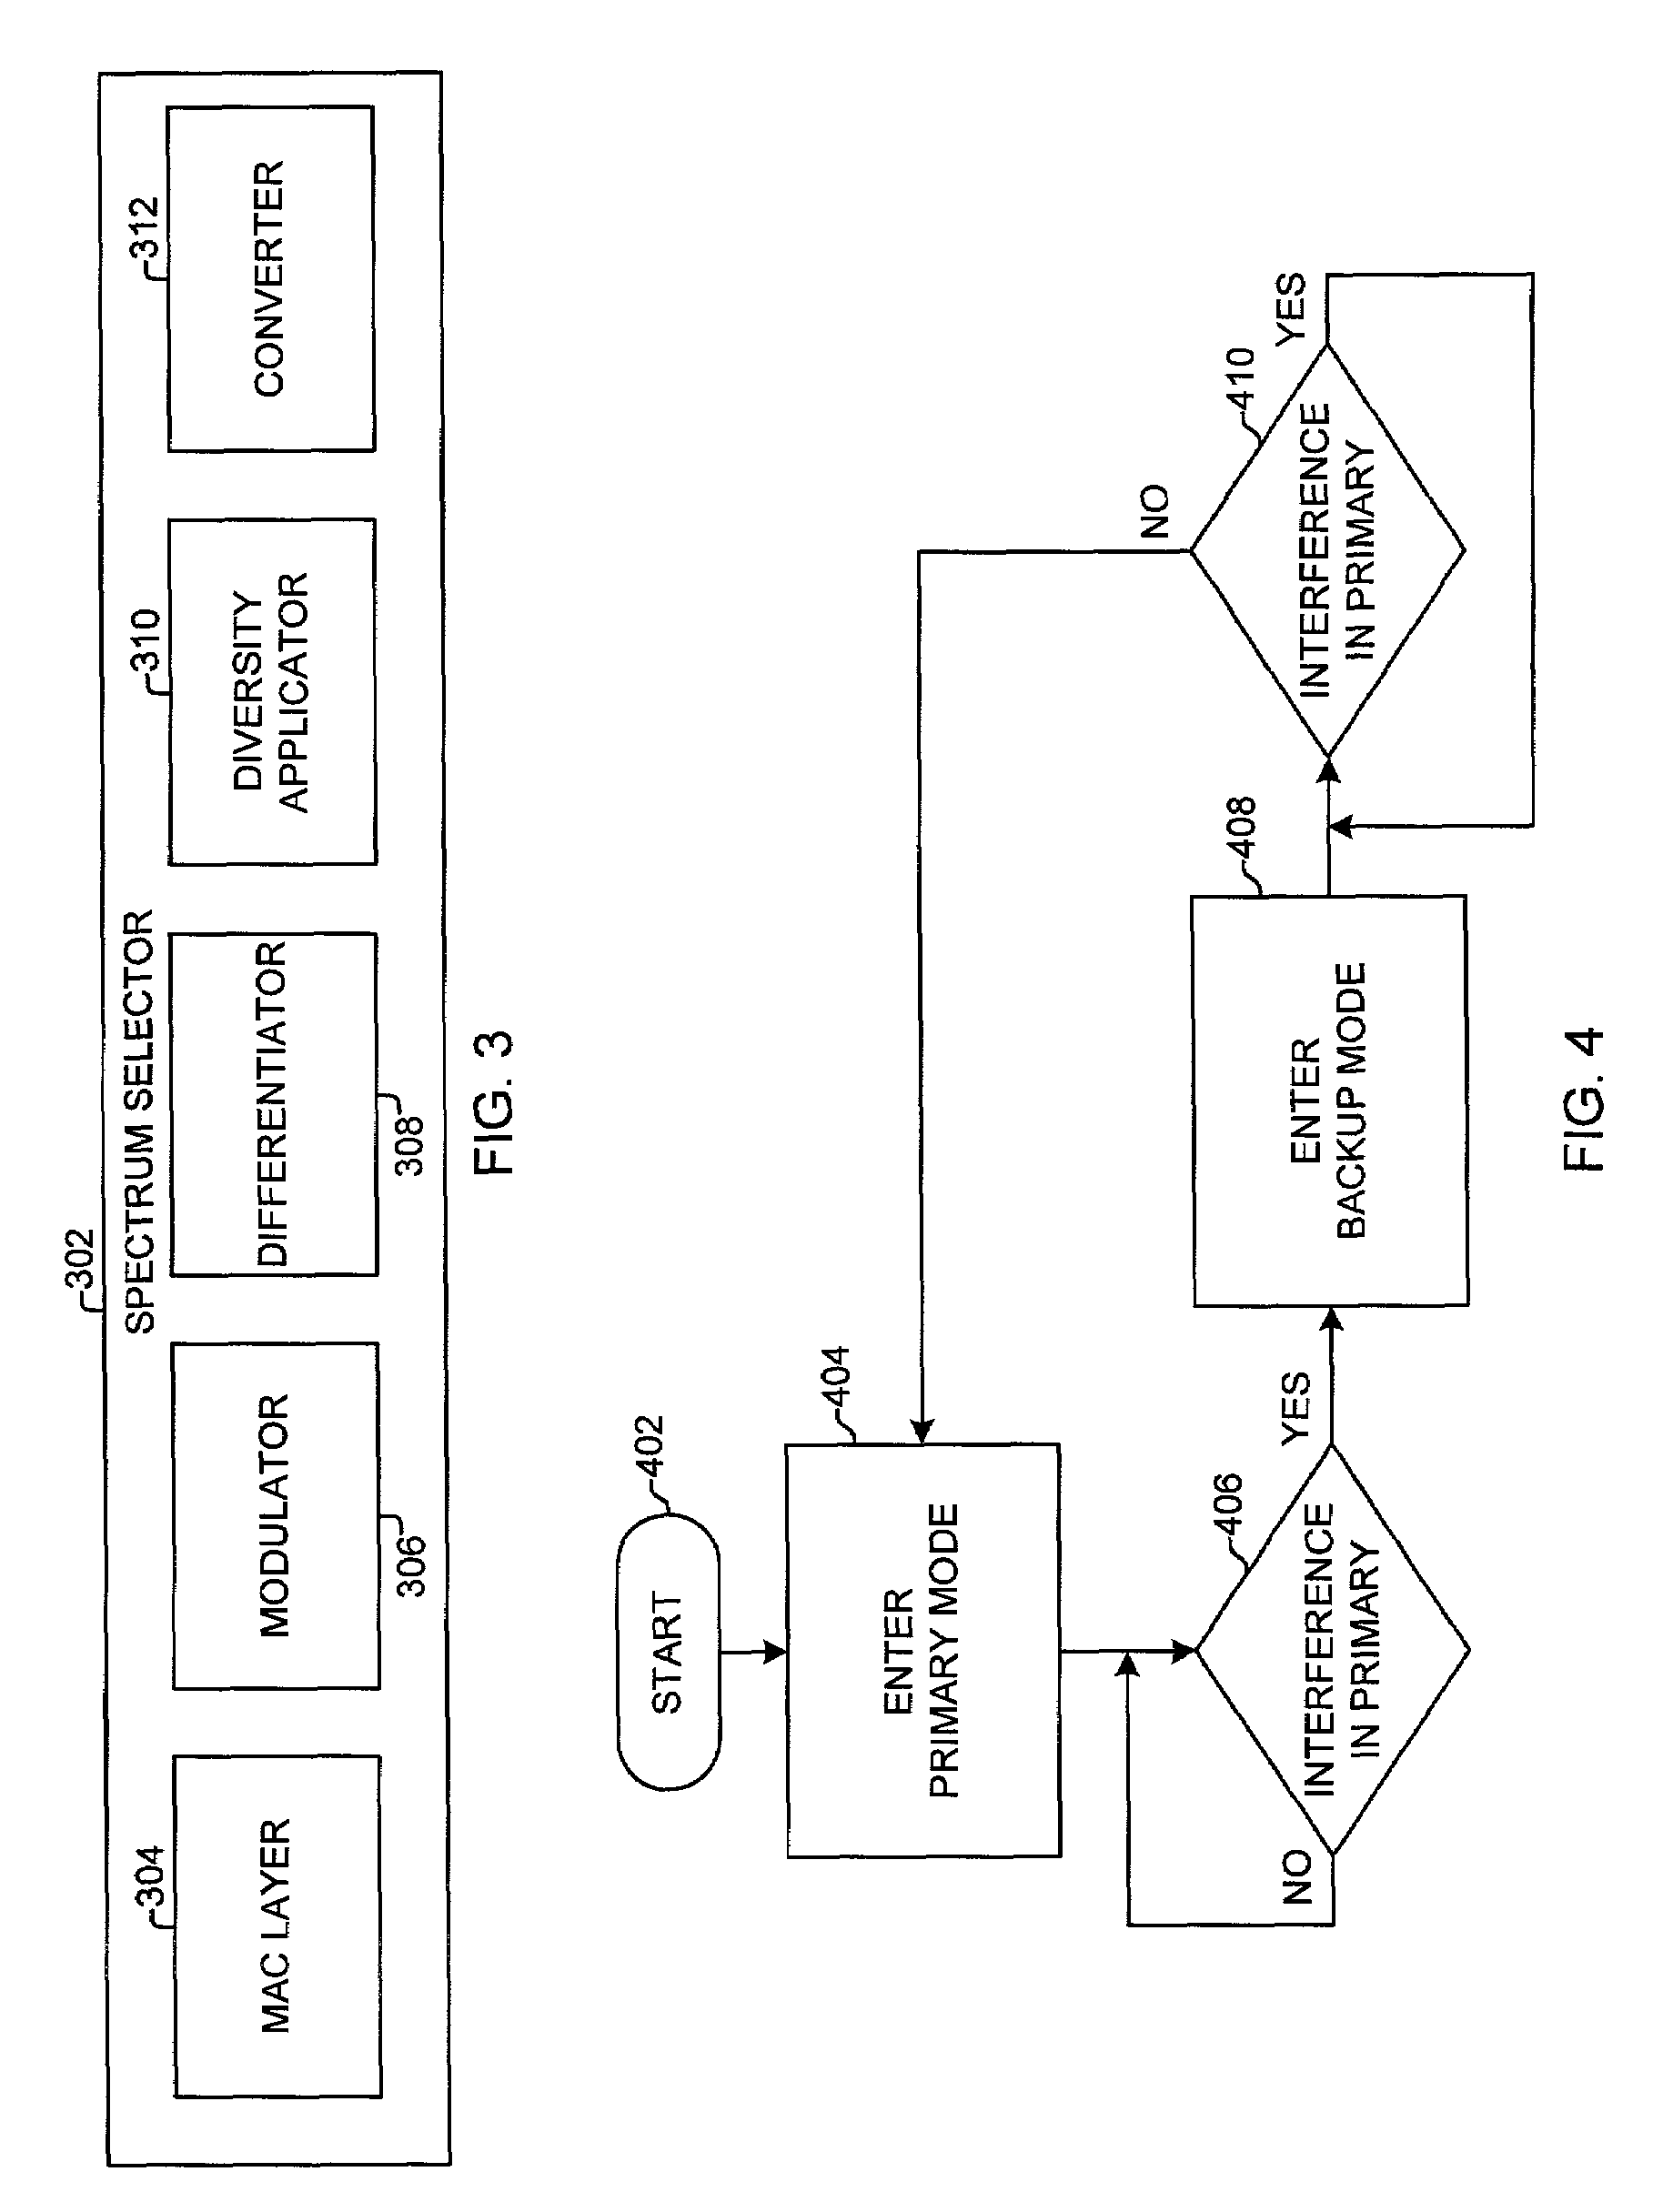 System and method for selecting spectrum